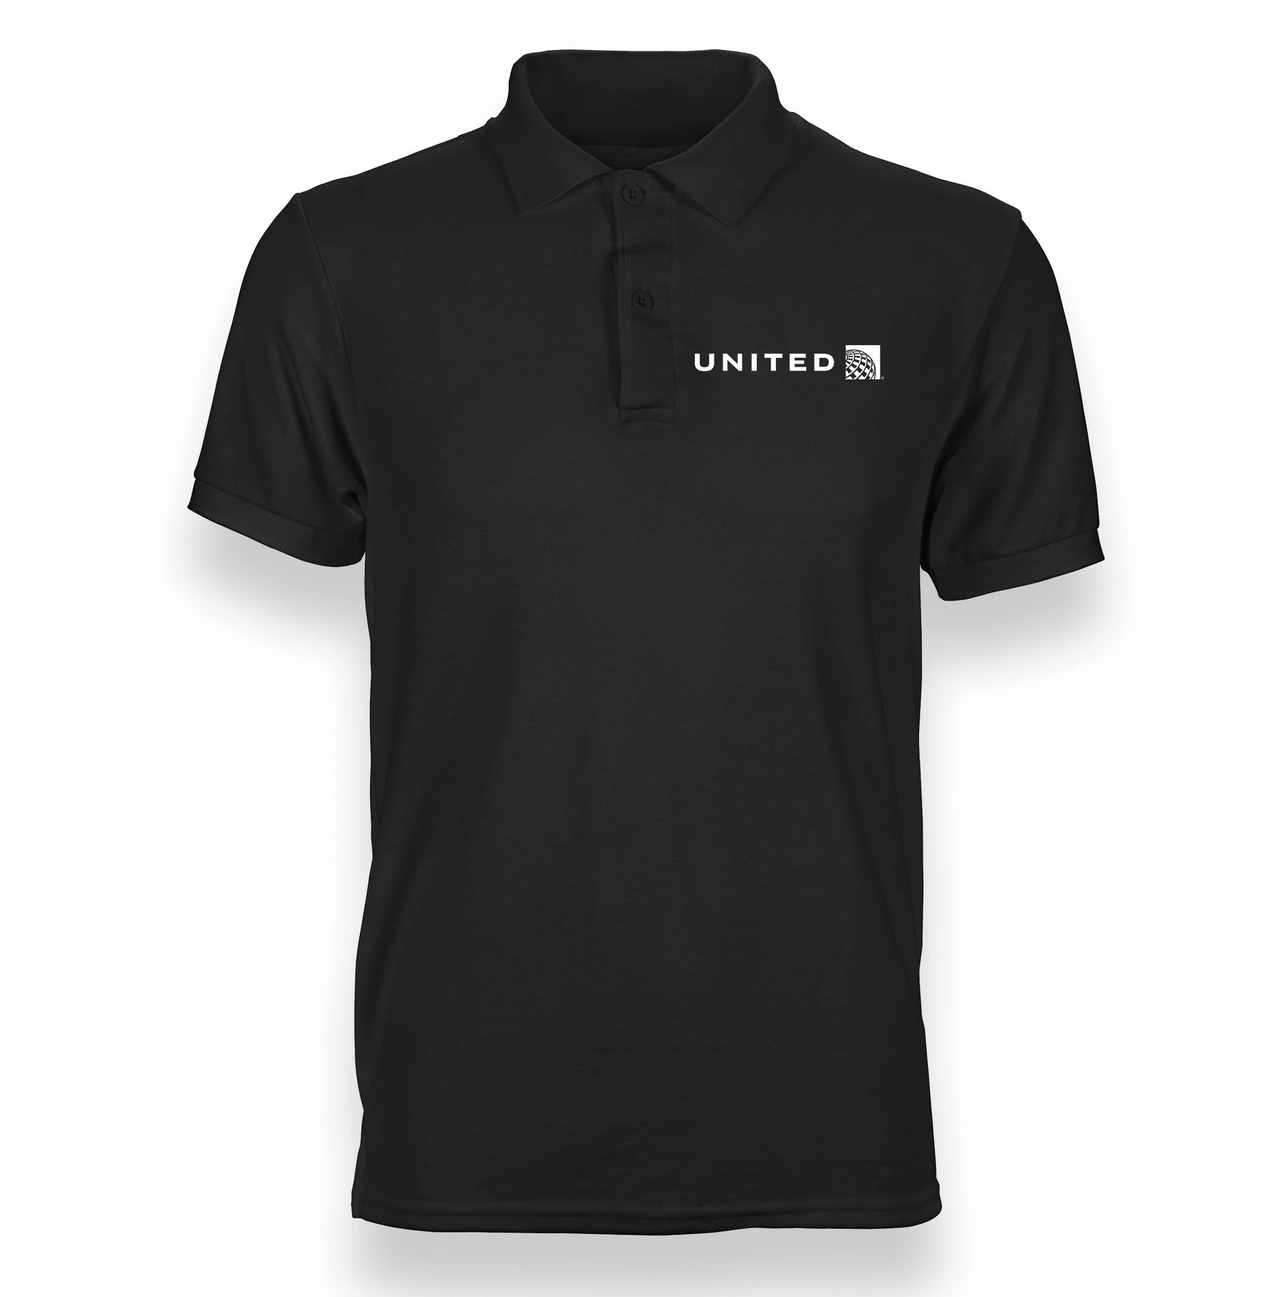 UNITED AIRLINES POLO T-SHIRT